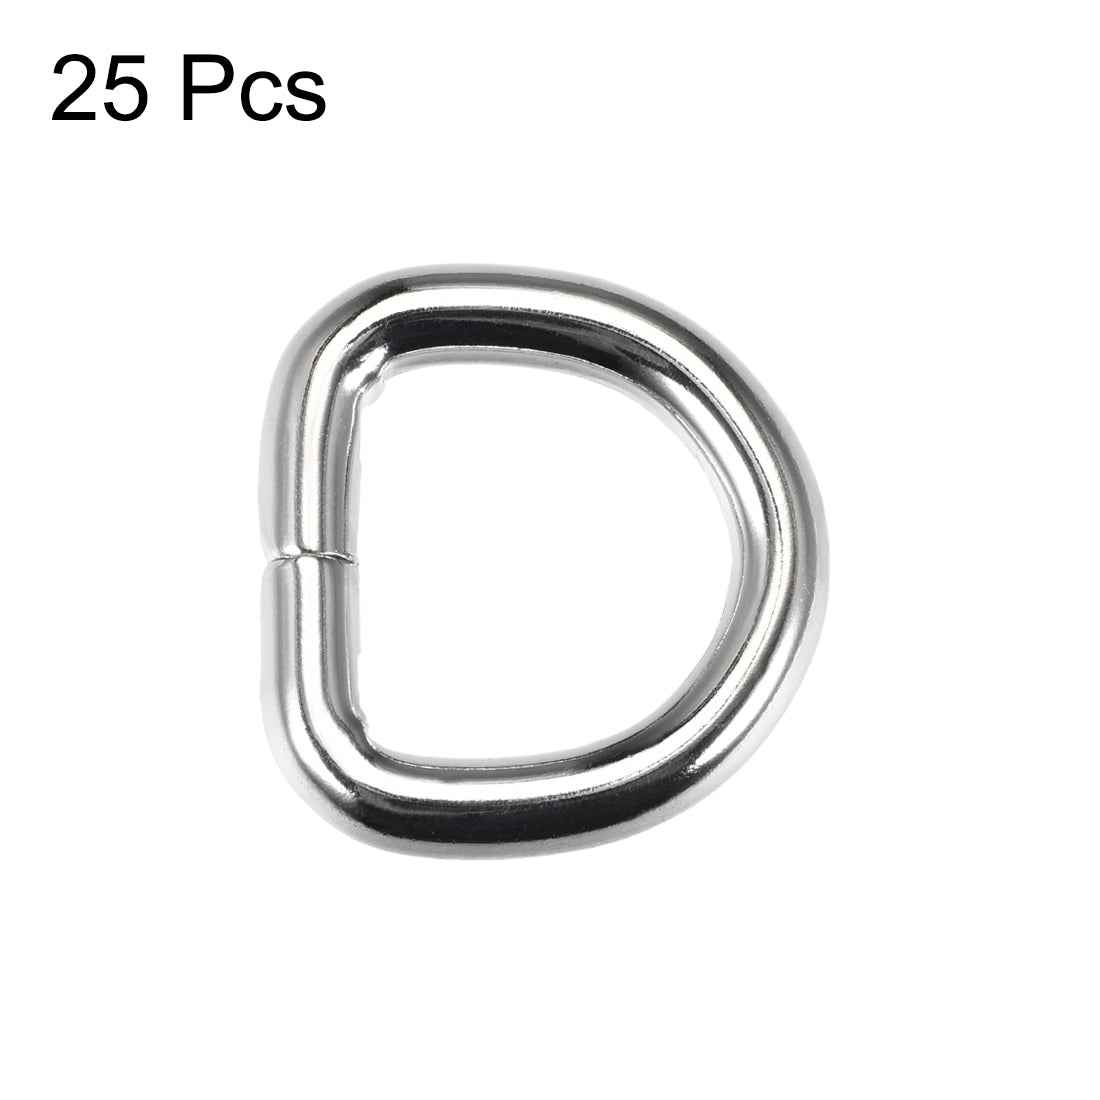 uxcell Uxcell 25 Pcs D Ring Buckle 0.63 Inch Metal Semi-Circular D-Rings Silver Tone for Hardware Bags Belts Craft DIY Accessories